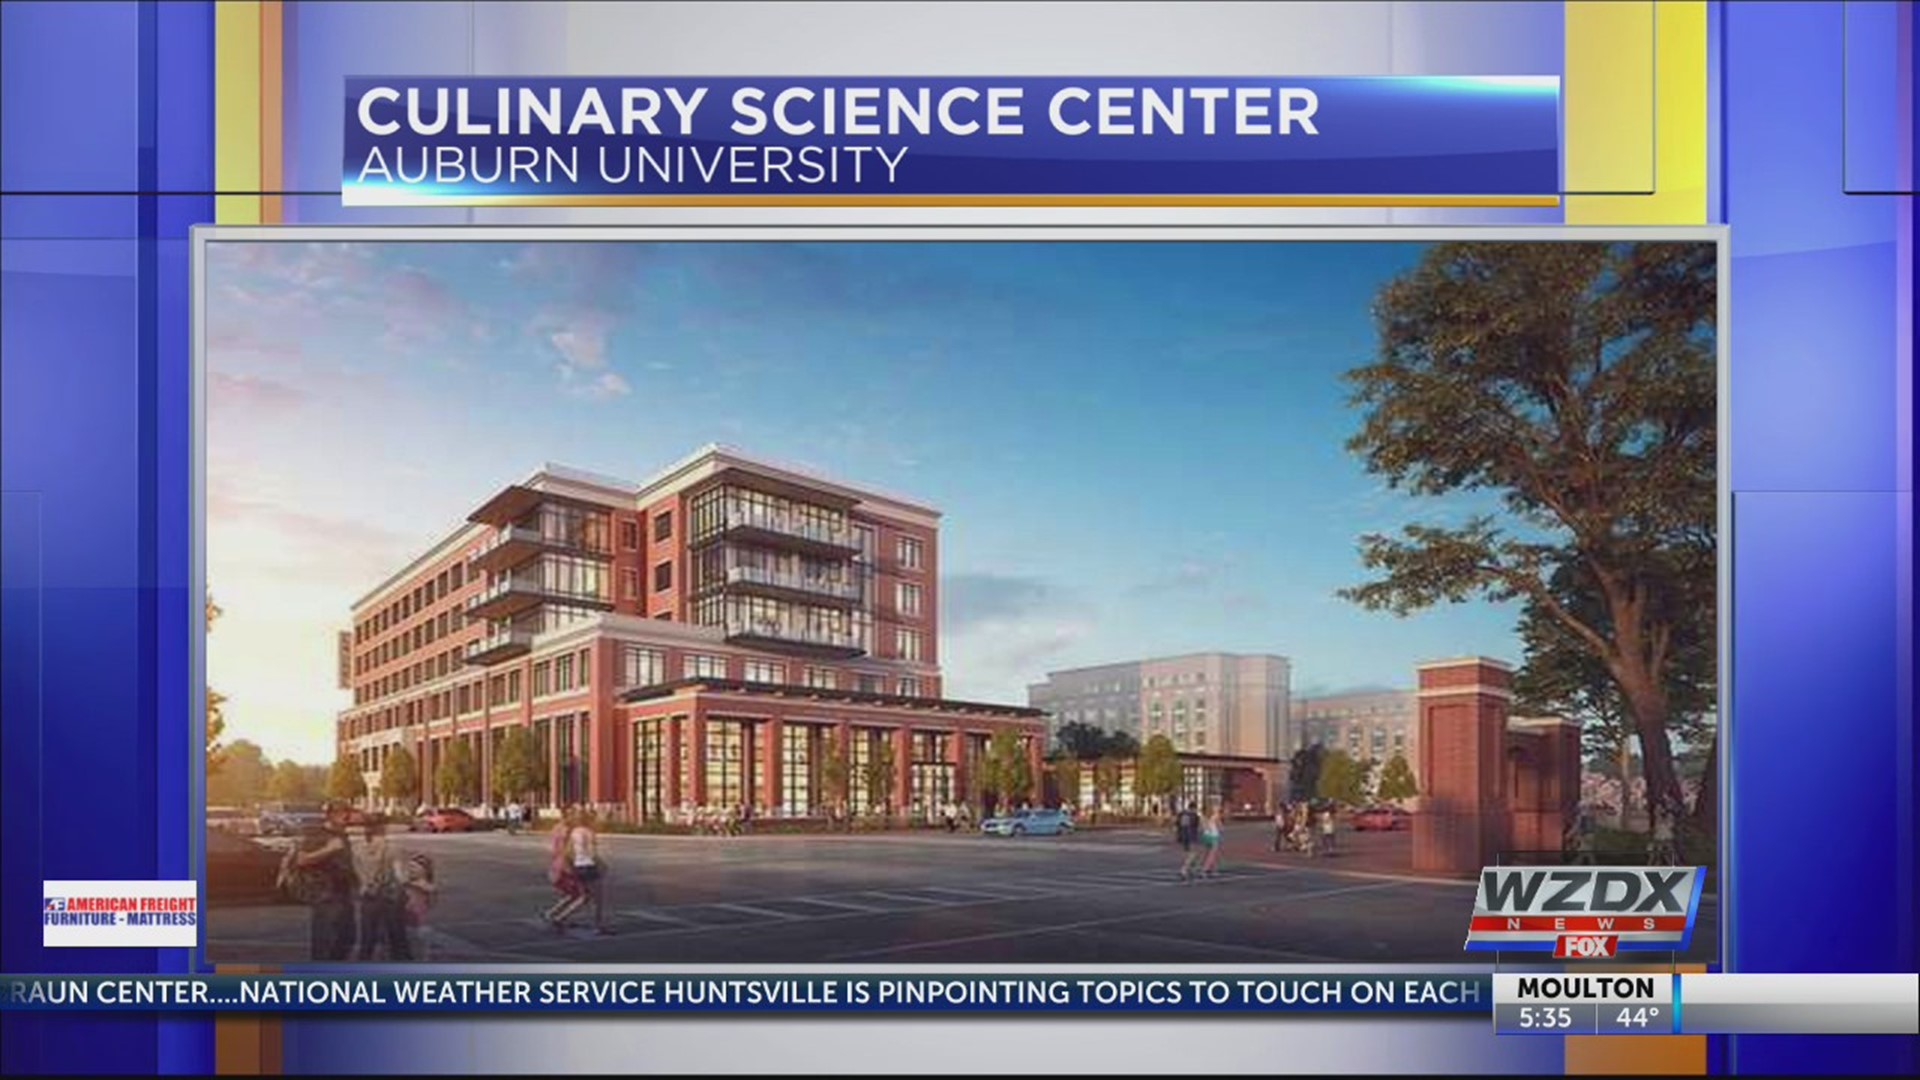 Auburn University is adding a $94.5 million culinary science center to its campus.